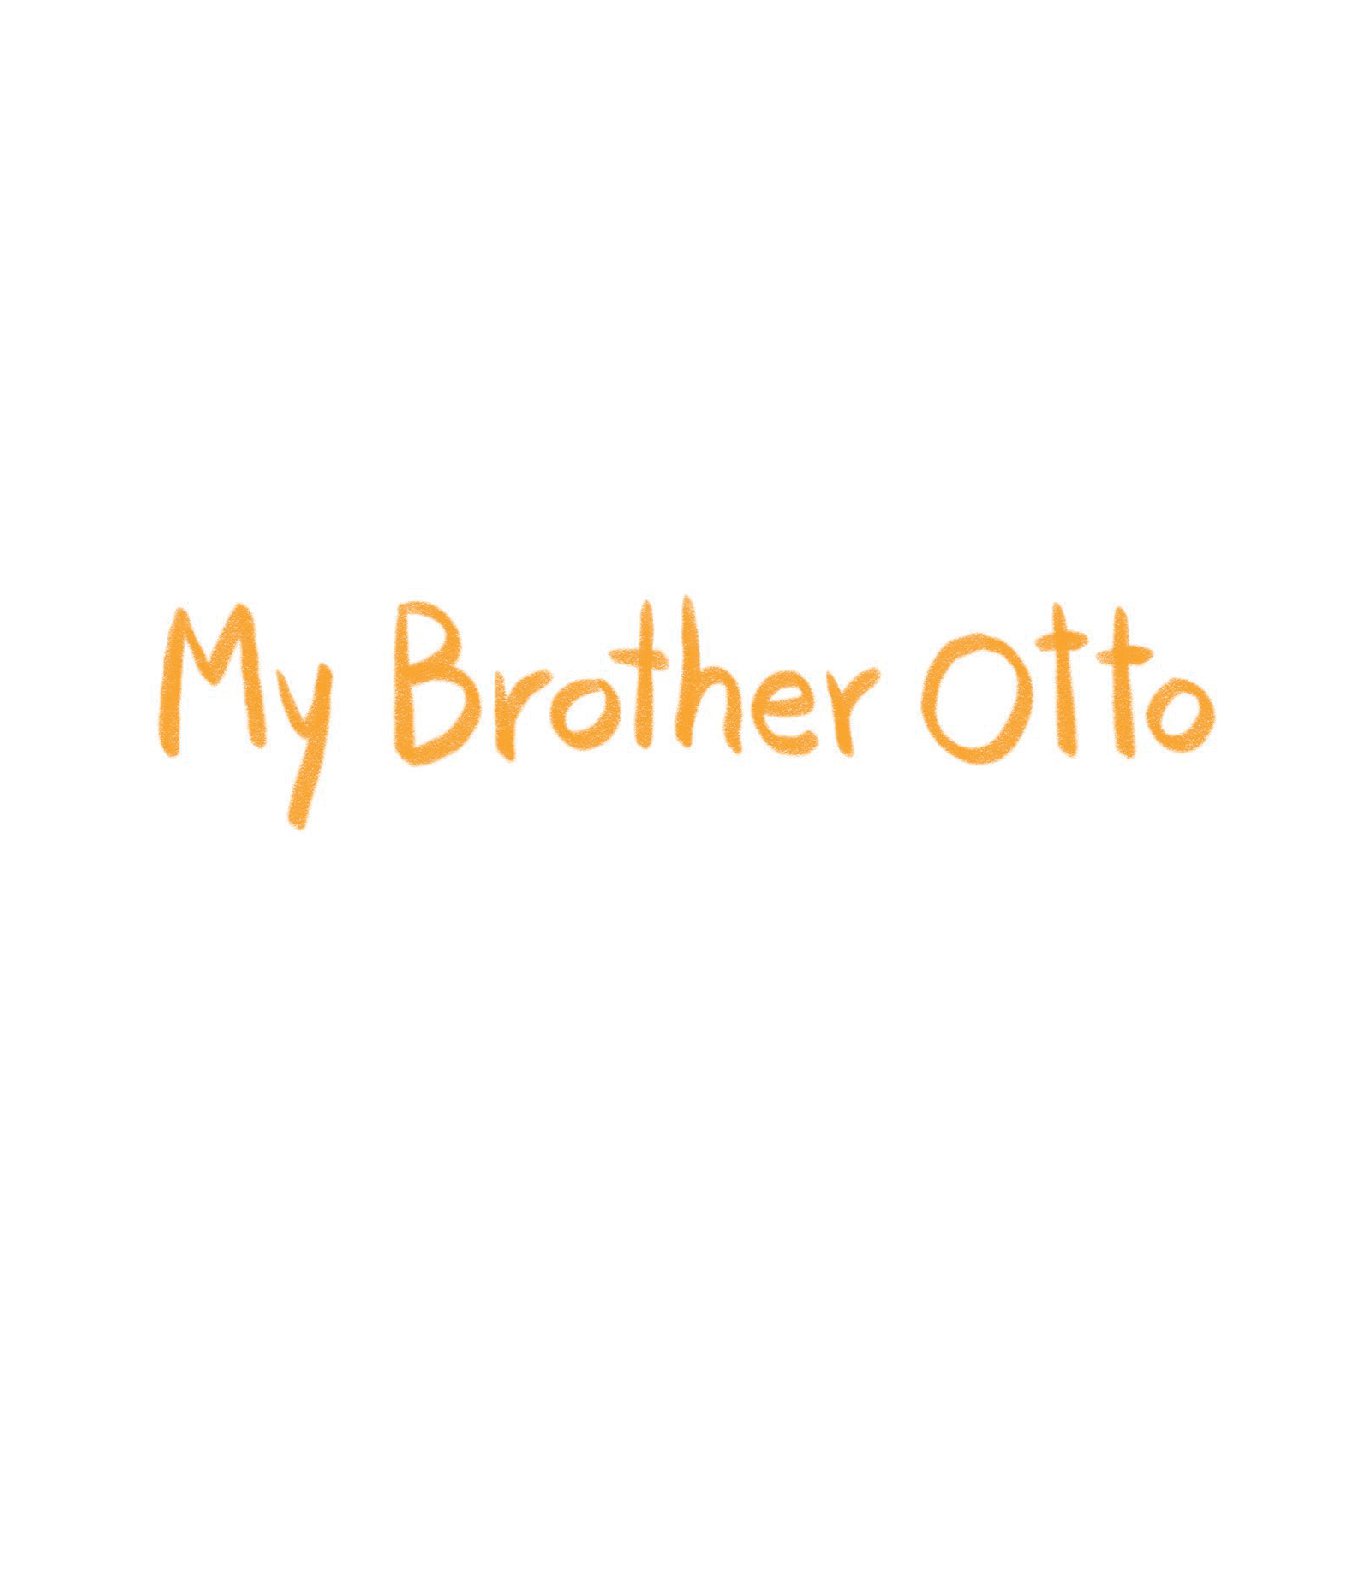 My Brother Otto